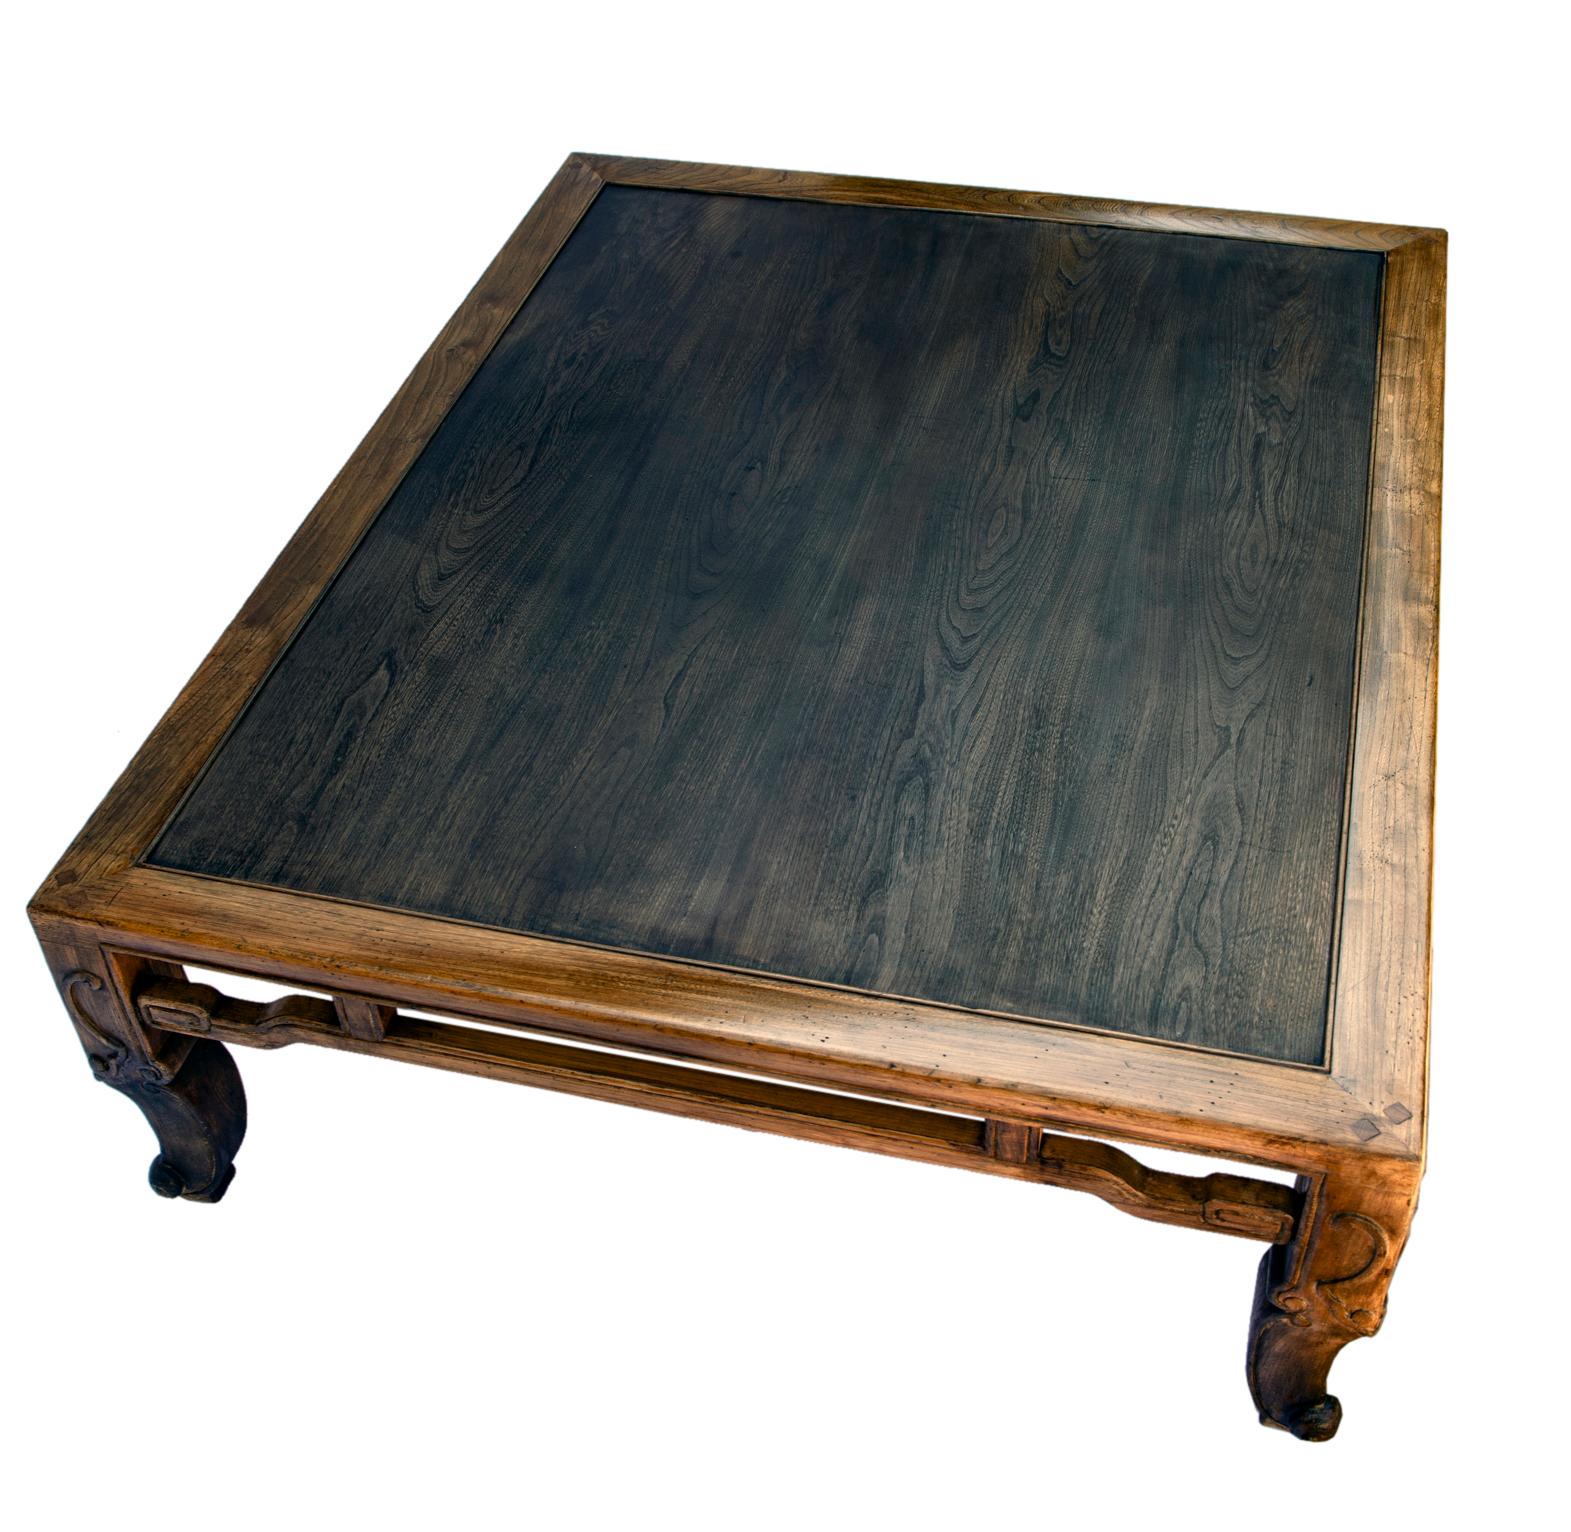 Hand-Crafted Modernist Ming Style Coffee Table by Baker Furniture